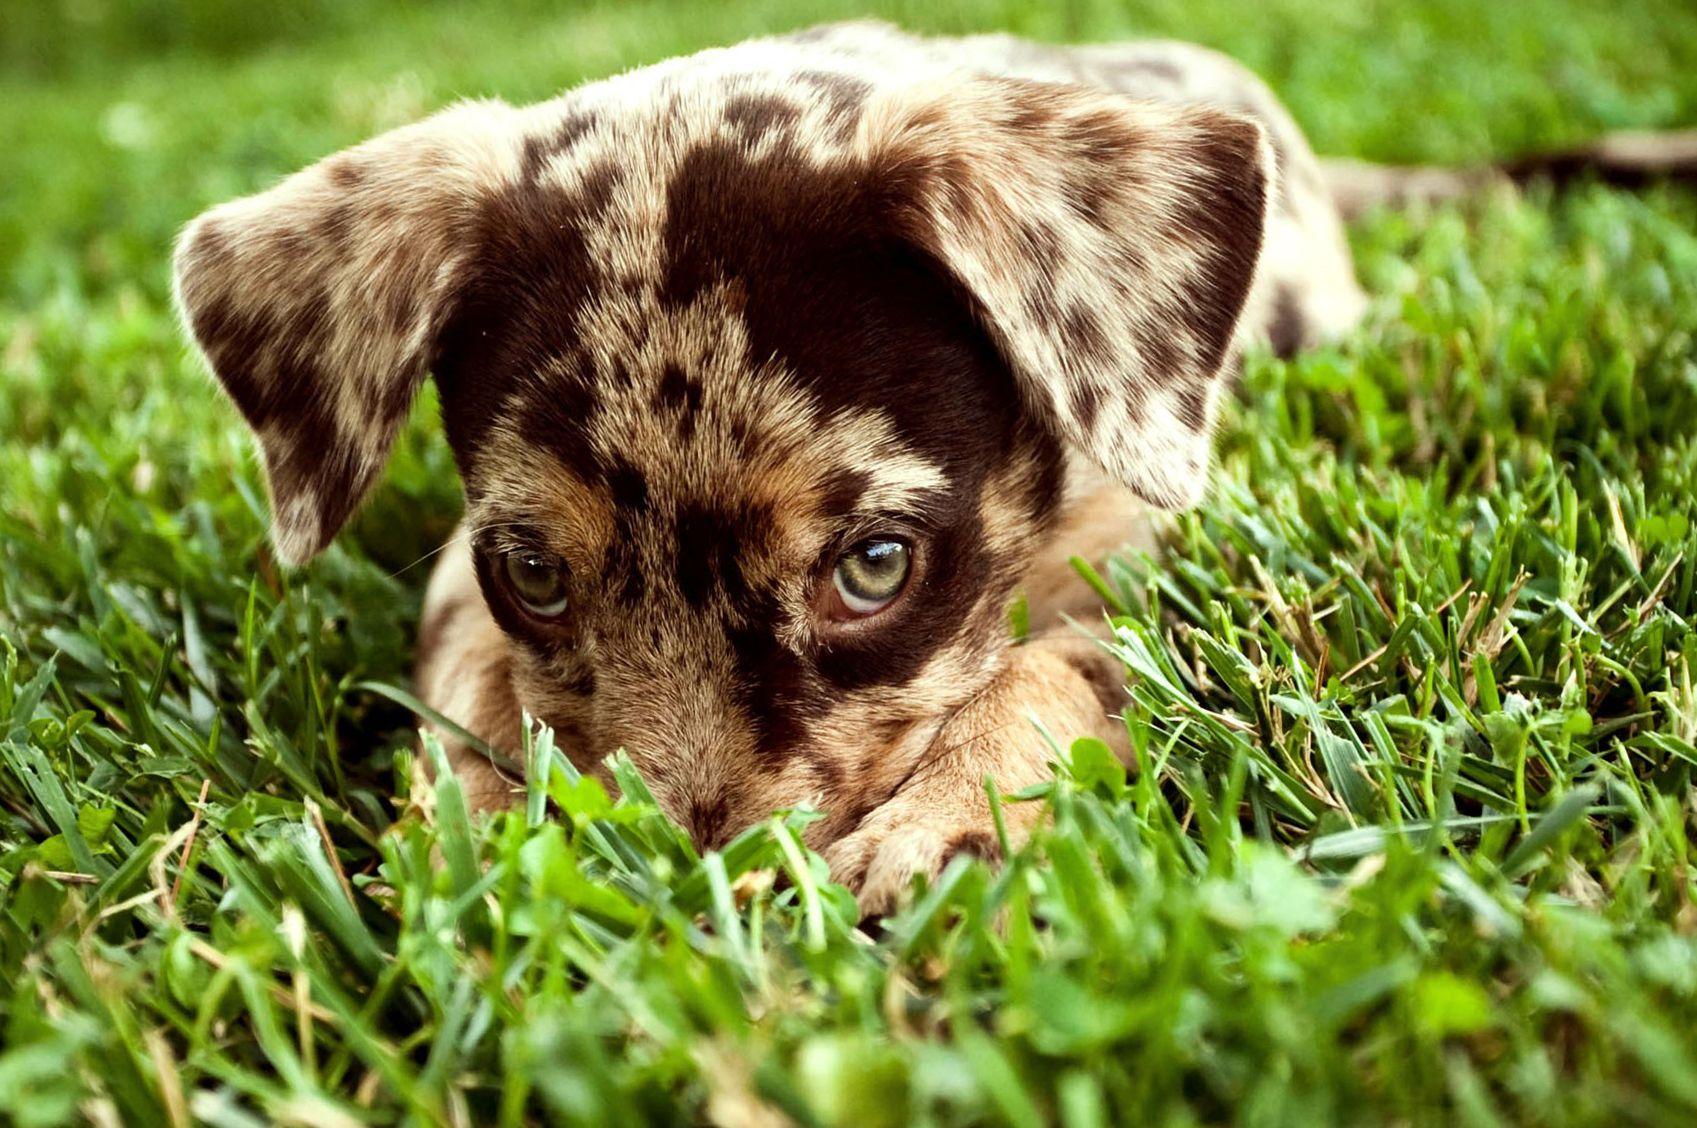 Dog Wallpaper, Cool Dogs, Claws, Desktop Image, Animals